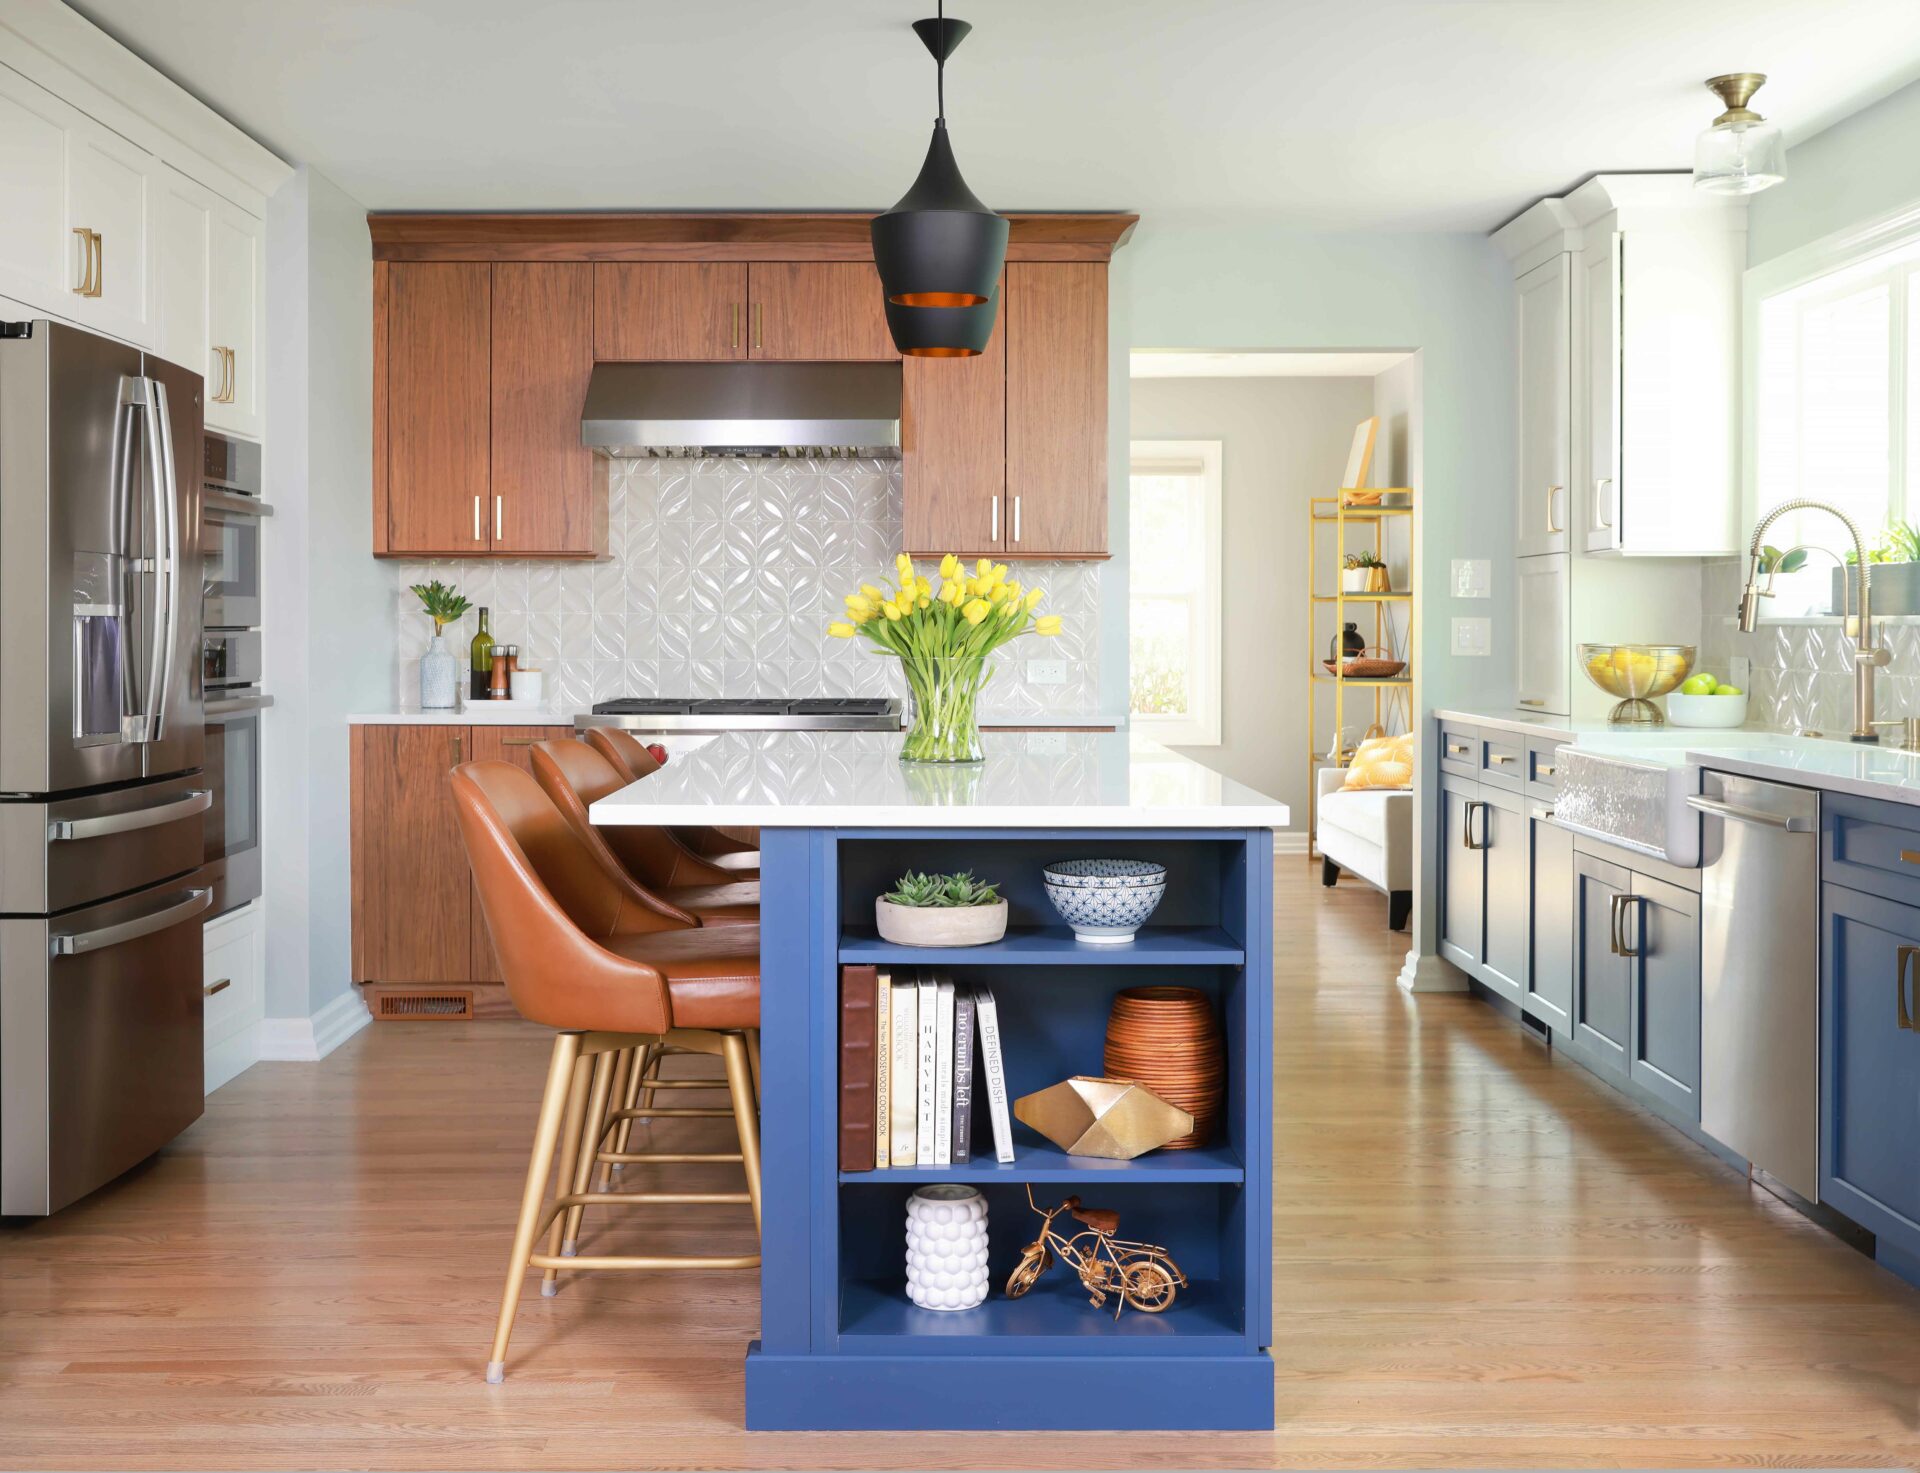 U shaped kitchen with island featuring walnut cabinets, white painted cabinets, and blue painted kitchen cabinets